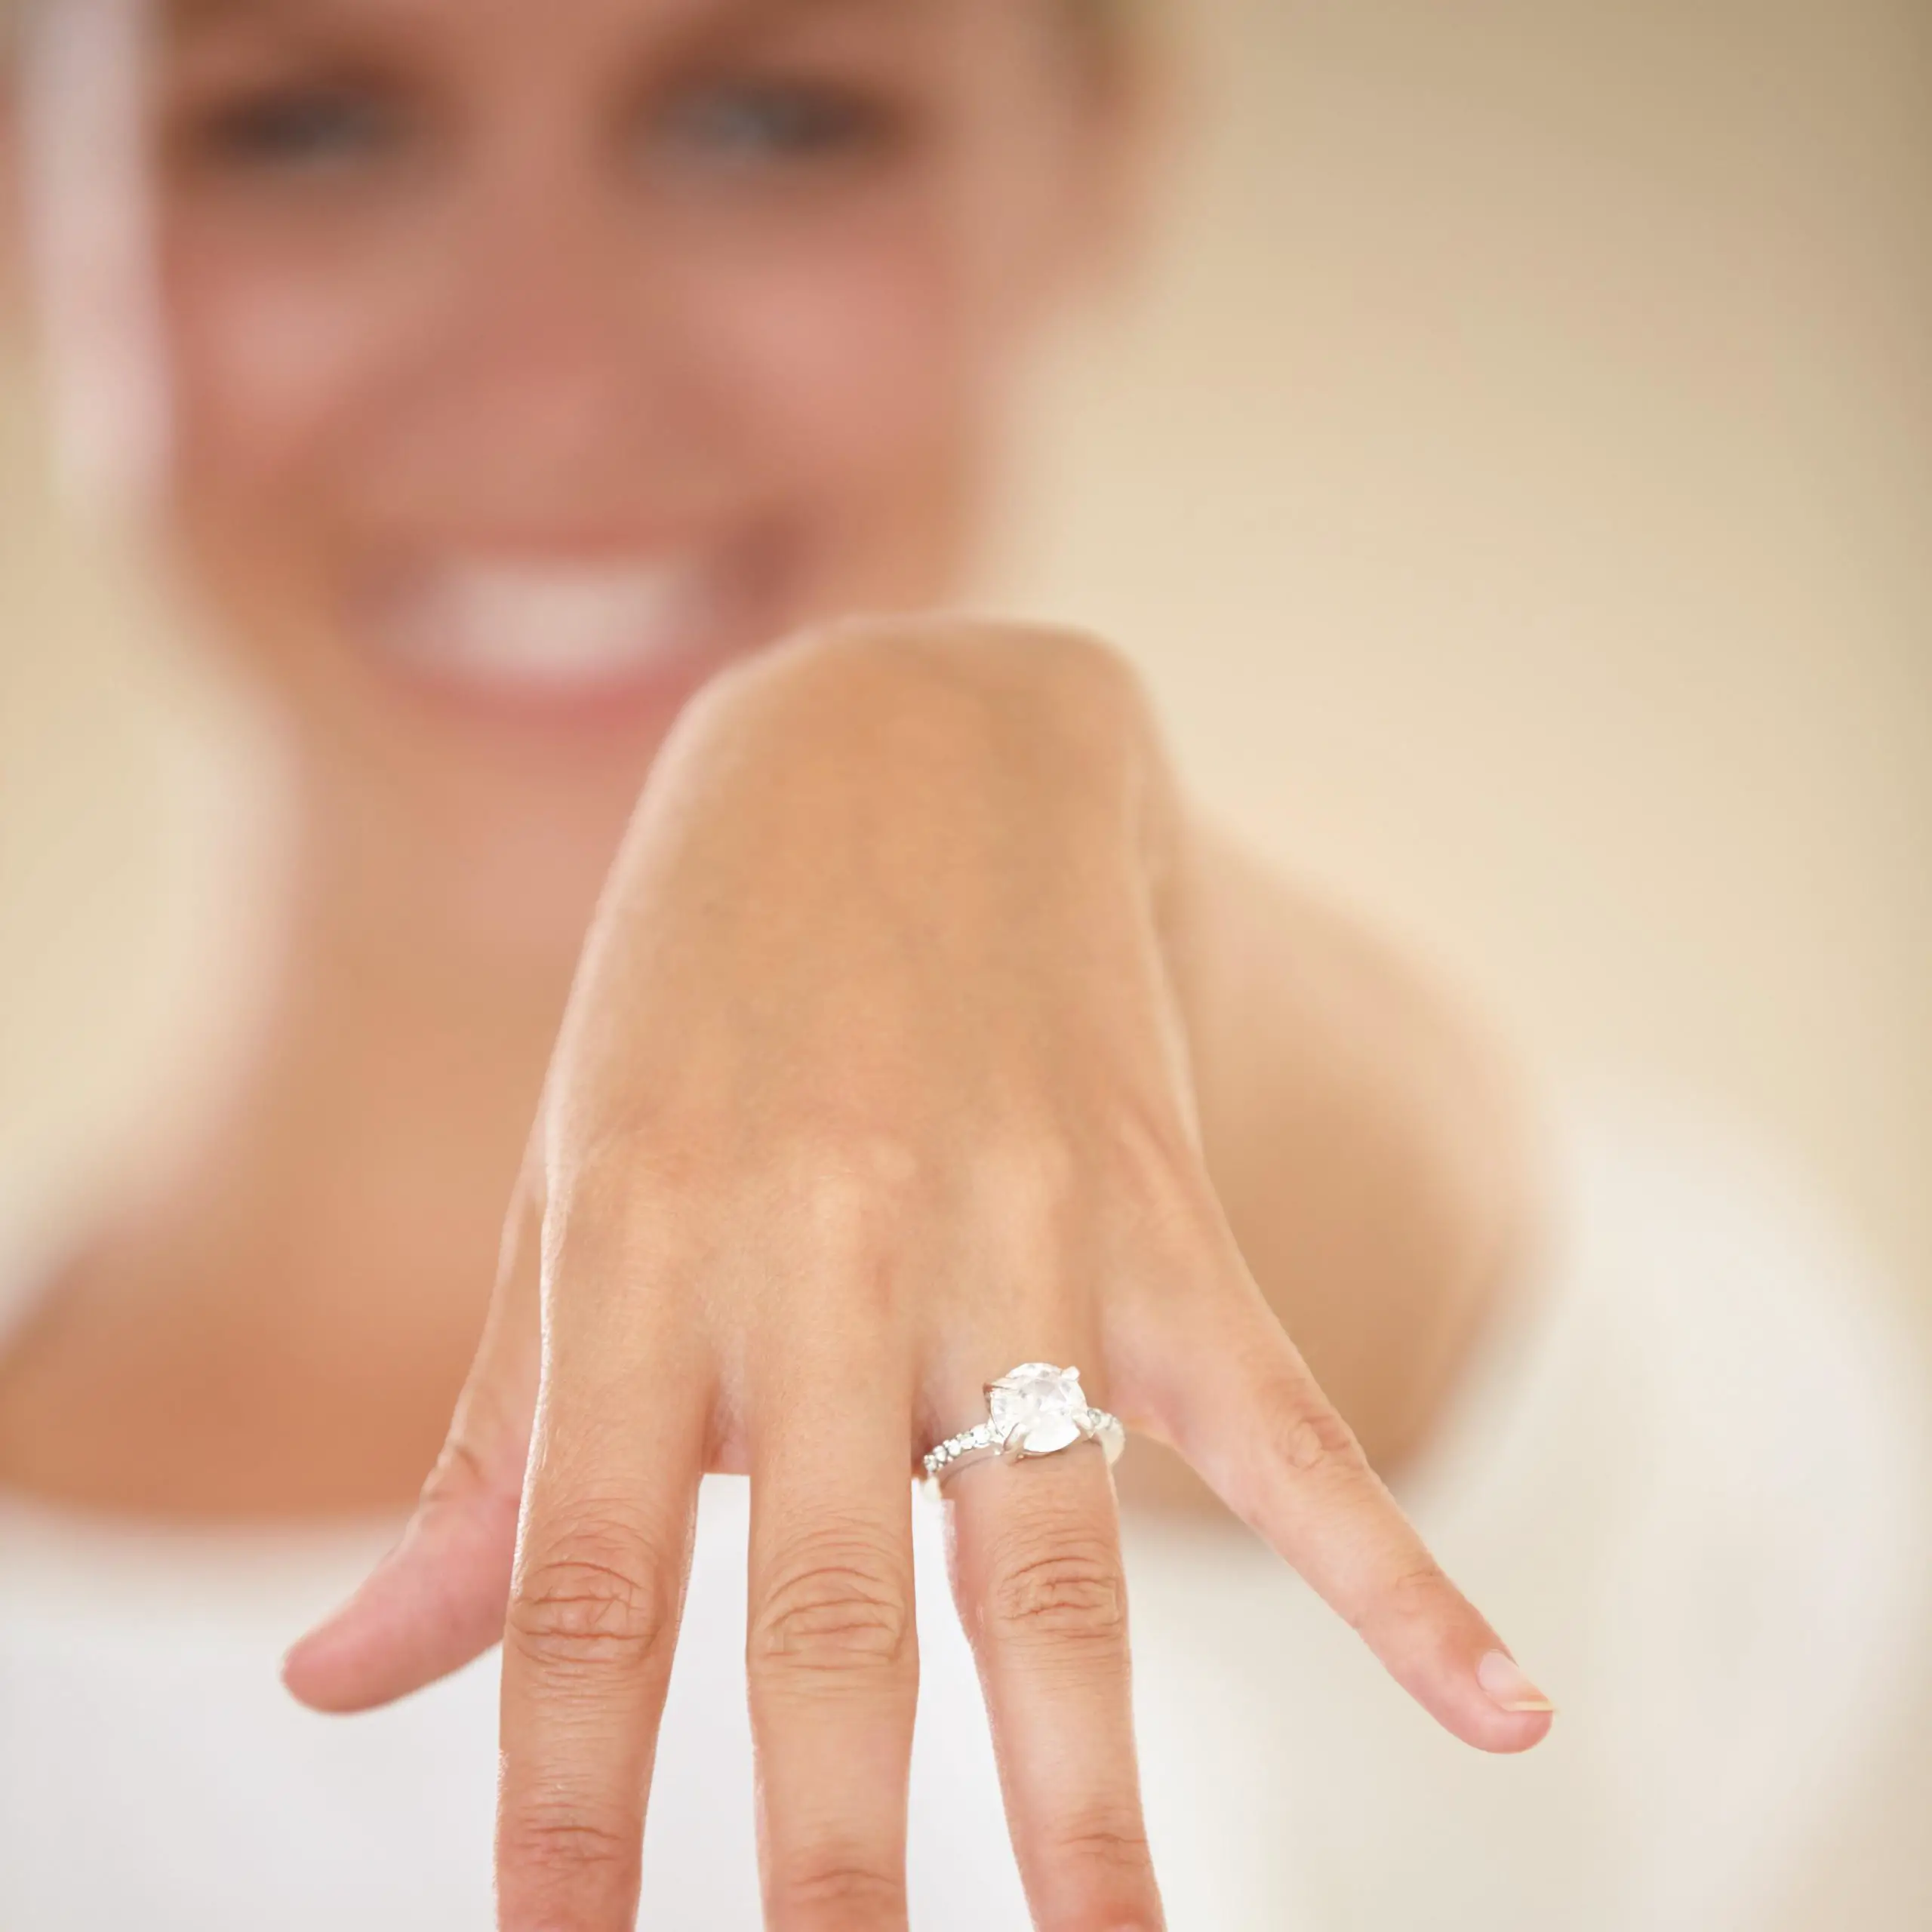 Is Wearing A Ring On Your Wedding Finger Unlucky